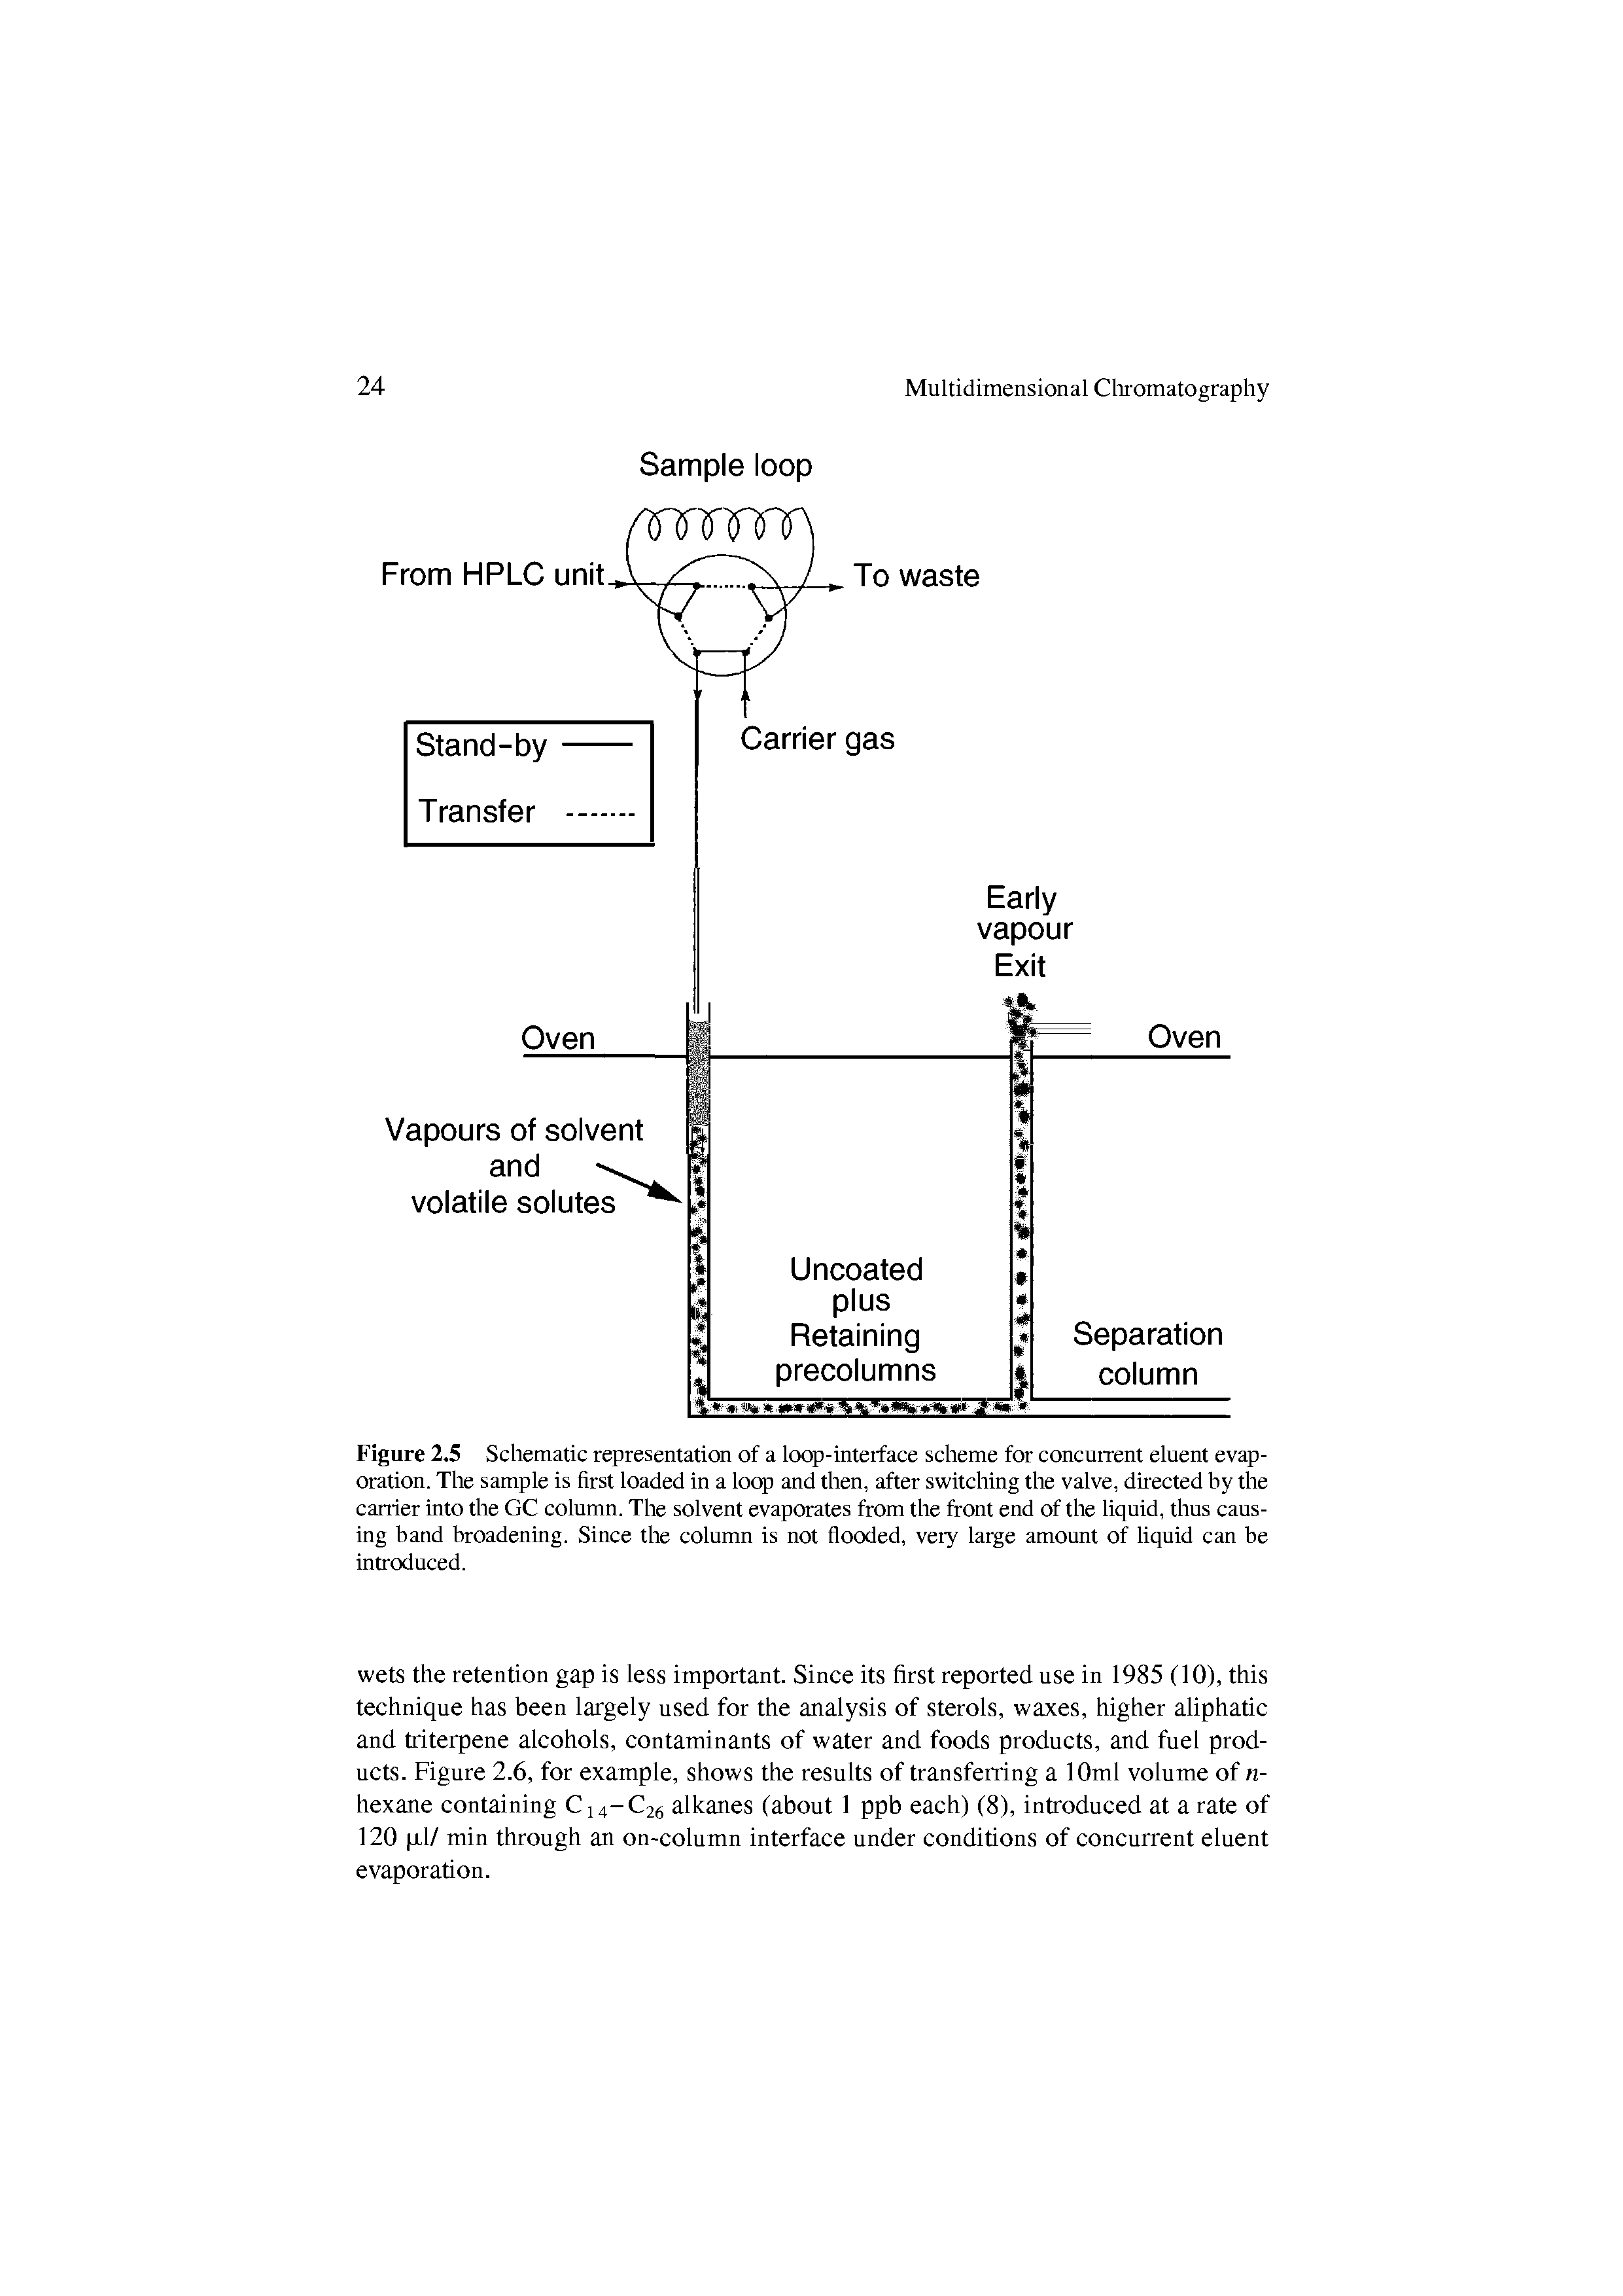 Figure 2.5 Schematic representation of a loop-interface scheme for concunent eluent evaporation. The sample is first loaded in a loop and then, after switching the valve, directed by the caiiier into the GC column. The solvent evaporates from the front end of the liquid, thus causing band broadening. Since the column is not flooded, very large amount of liquid can be inti oduced.